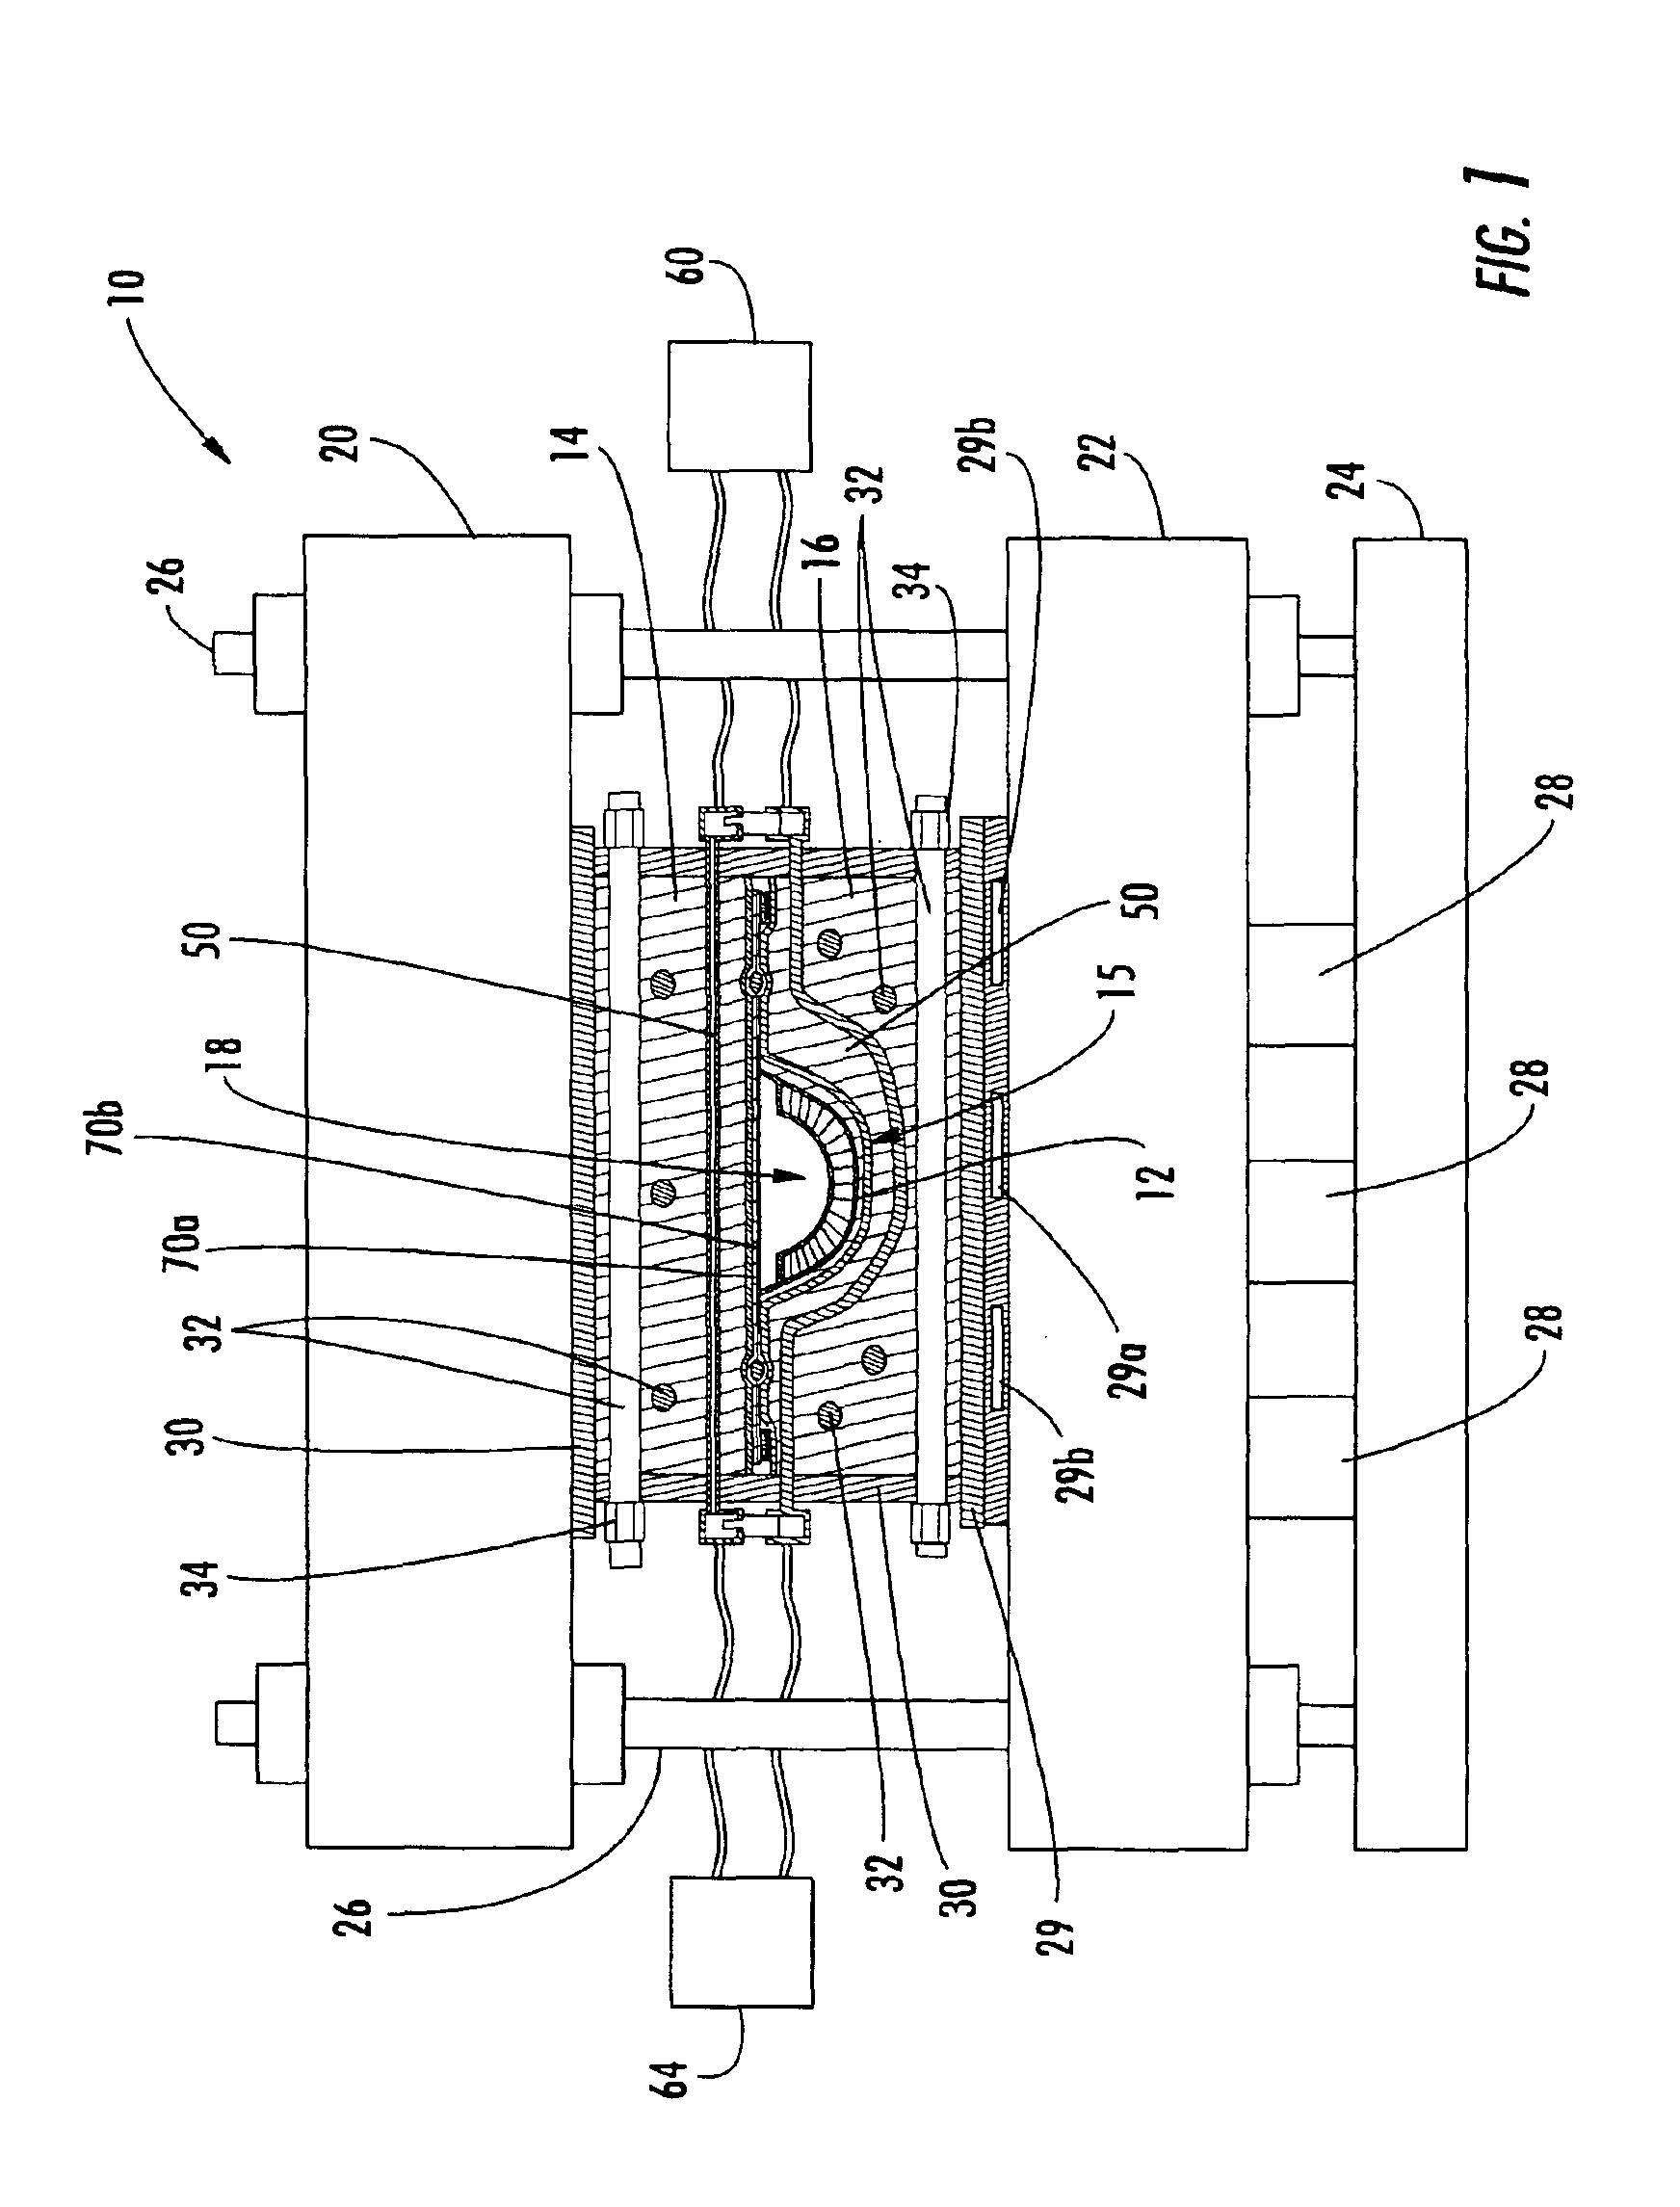 Susceptor connection system and associated apparatus and method